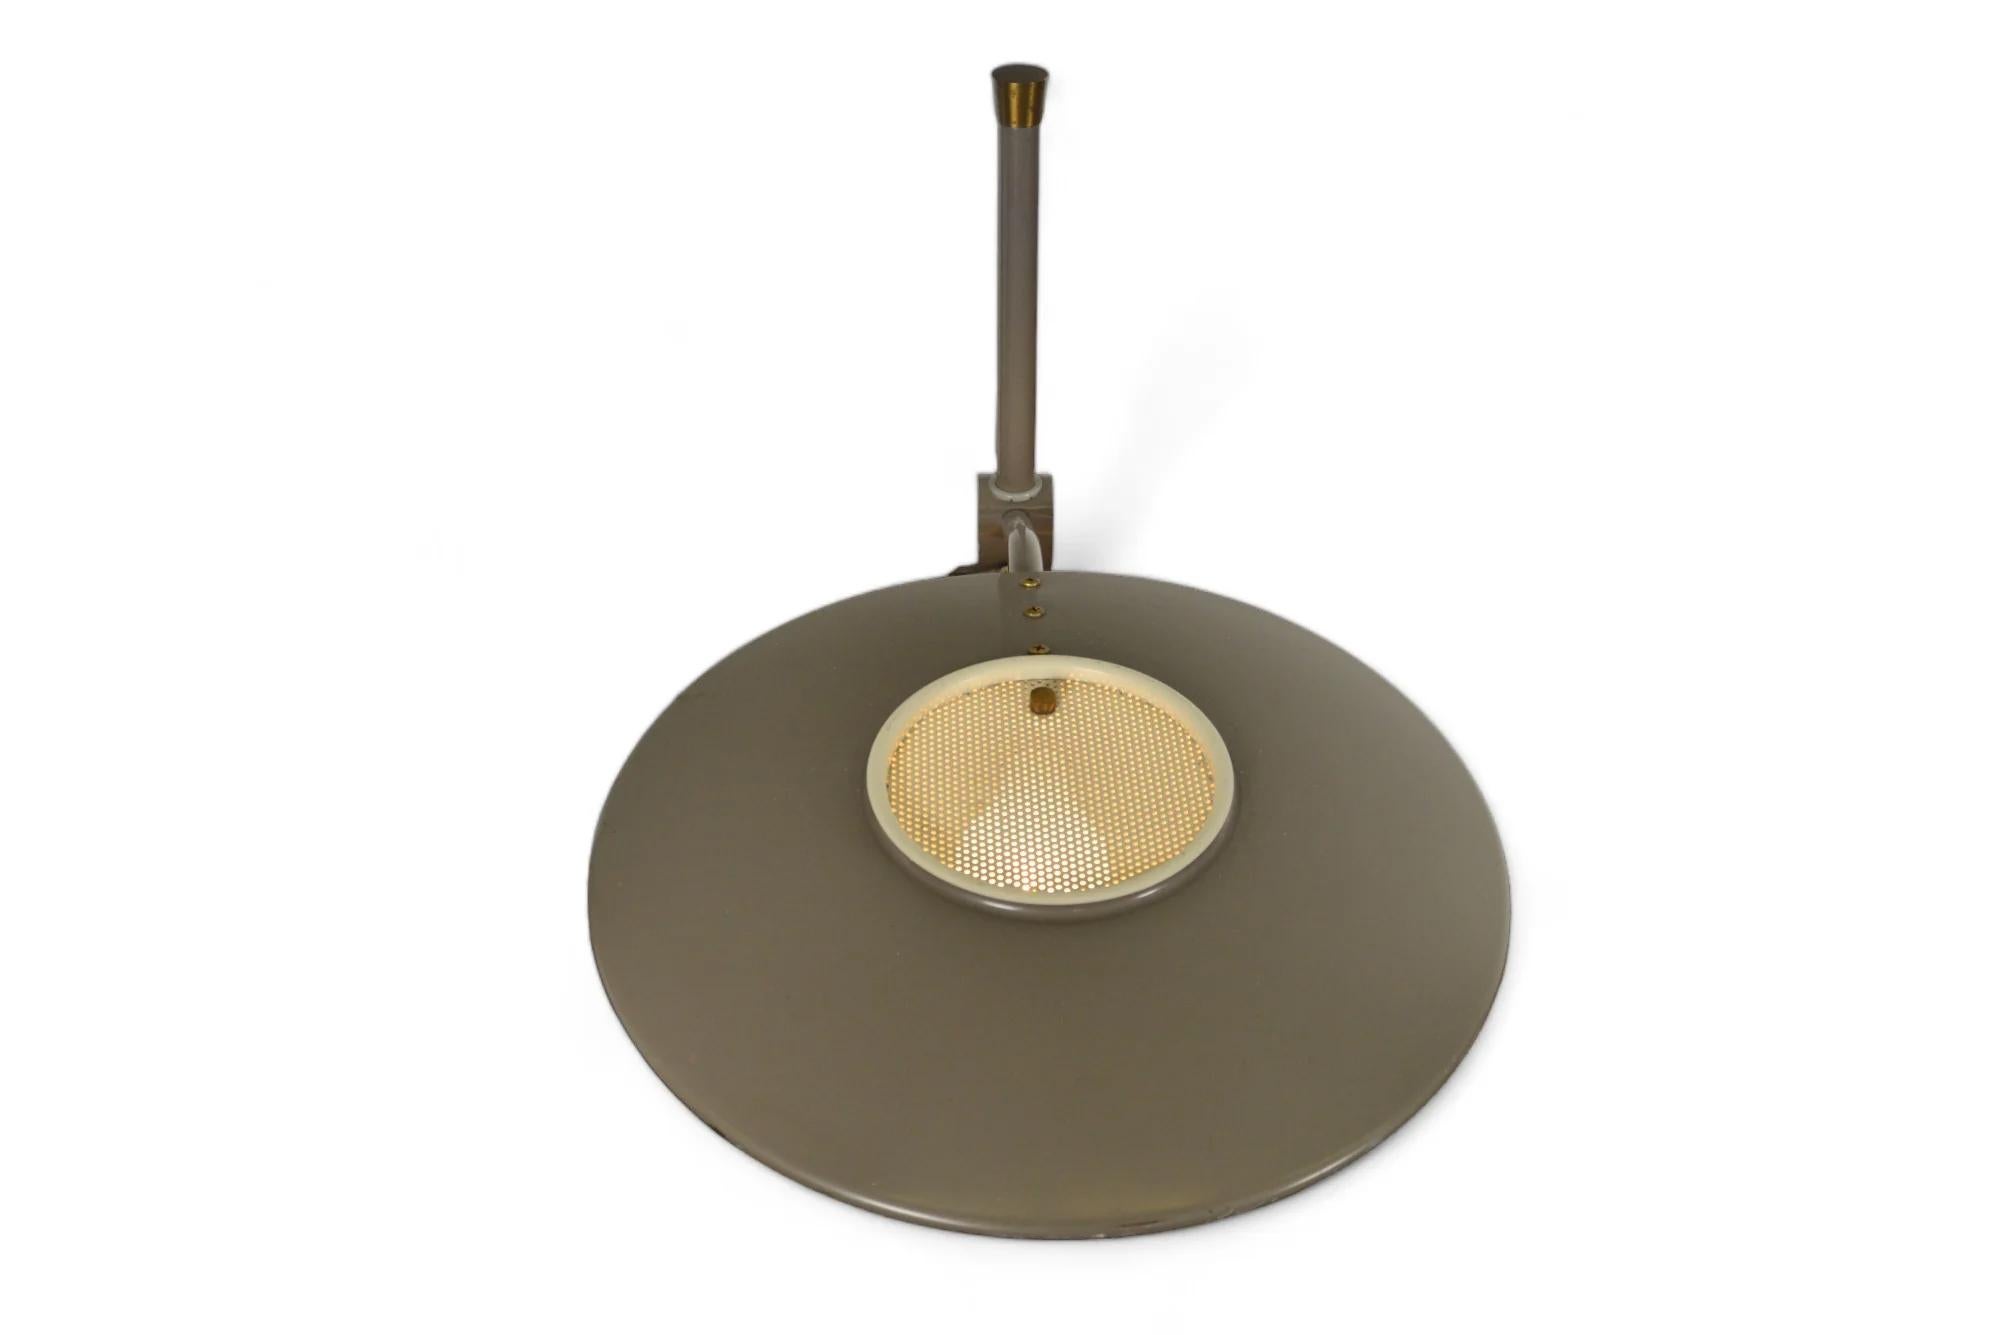 Steel Dazor Flying Saucer Space Age Table Lamp For Sale